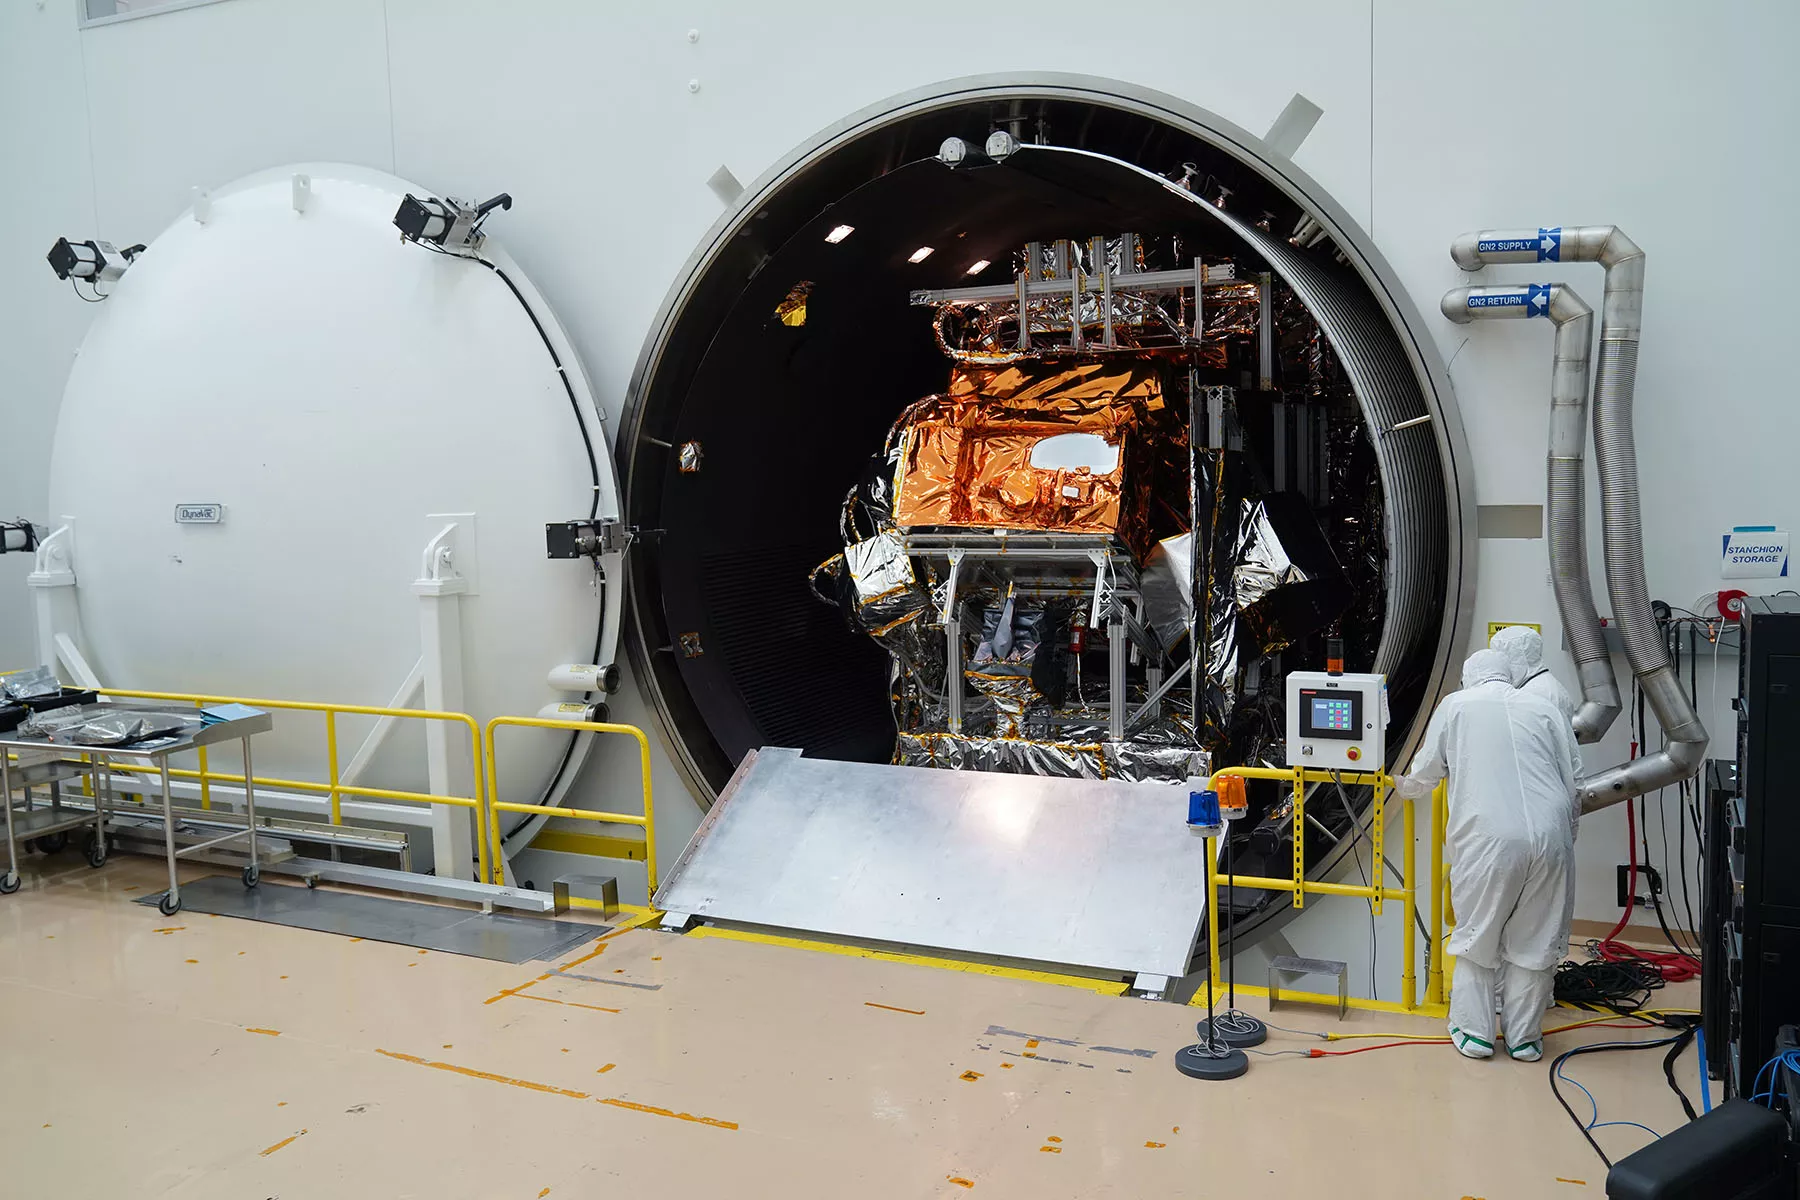 Image of JPSS-2 in the TVAC testing chamber